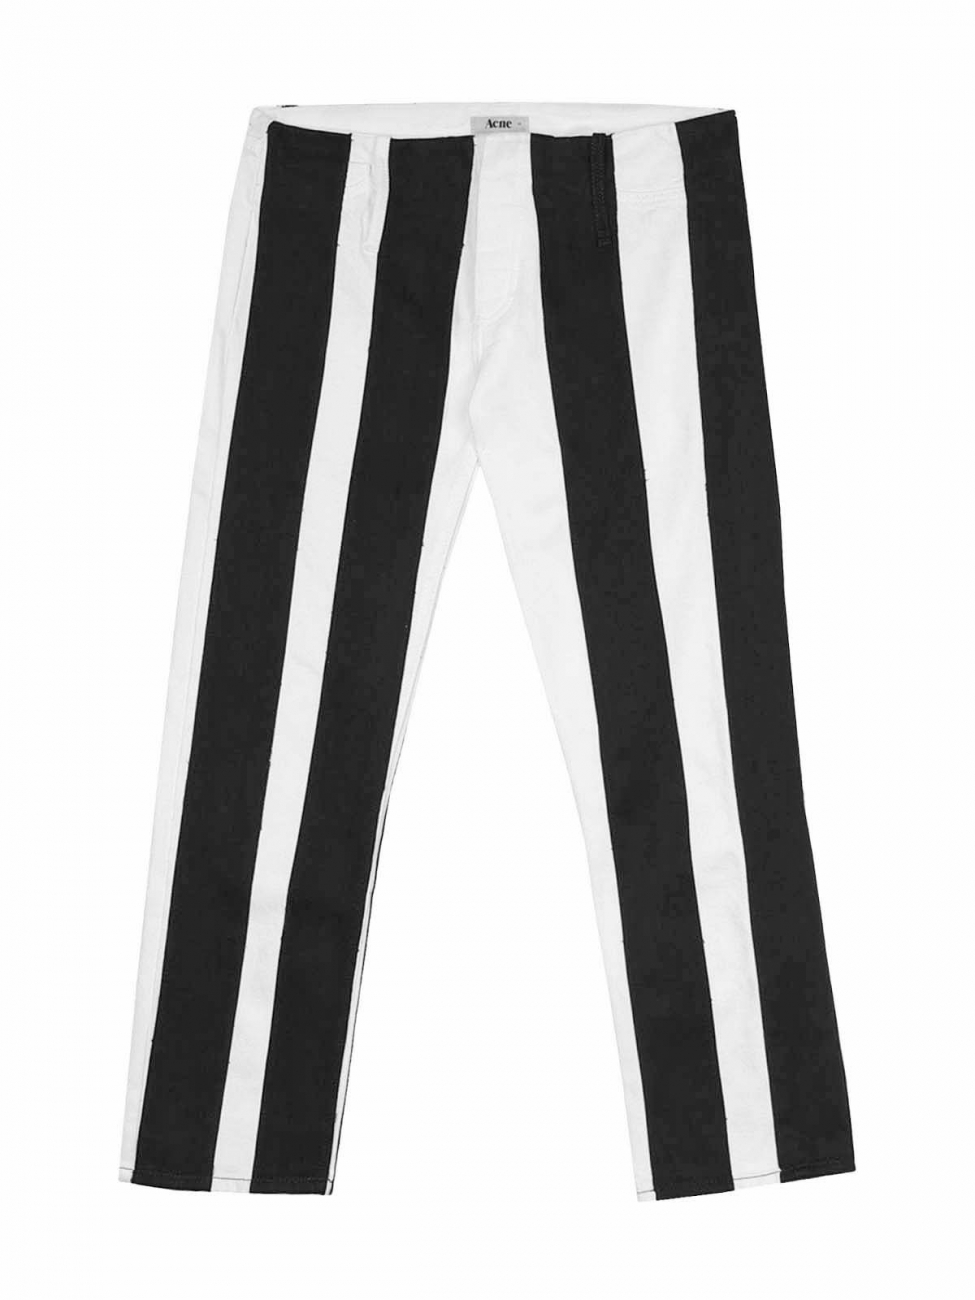 Boutique ACNE Black and white striped jeans Retail price 240€ Size